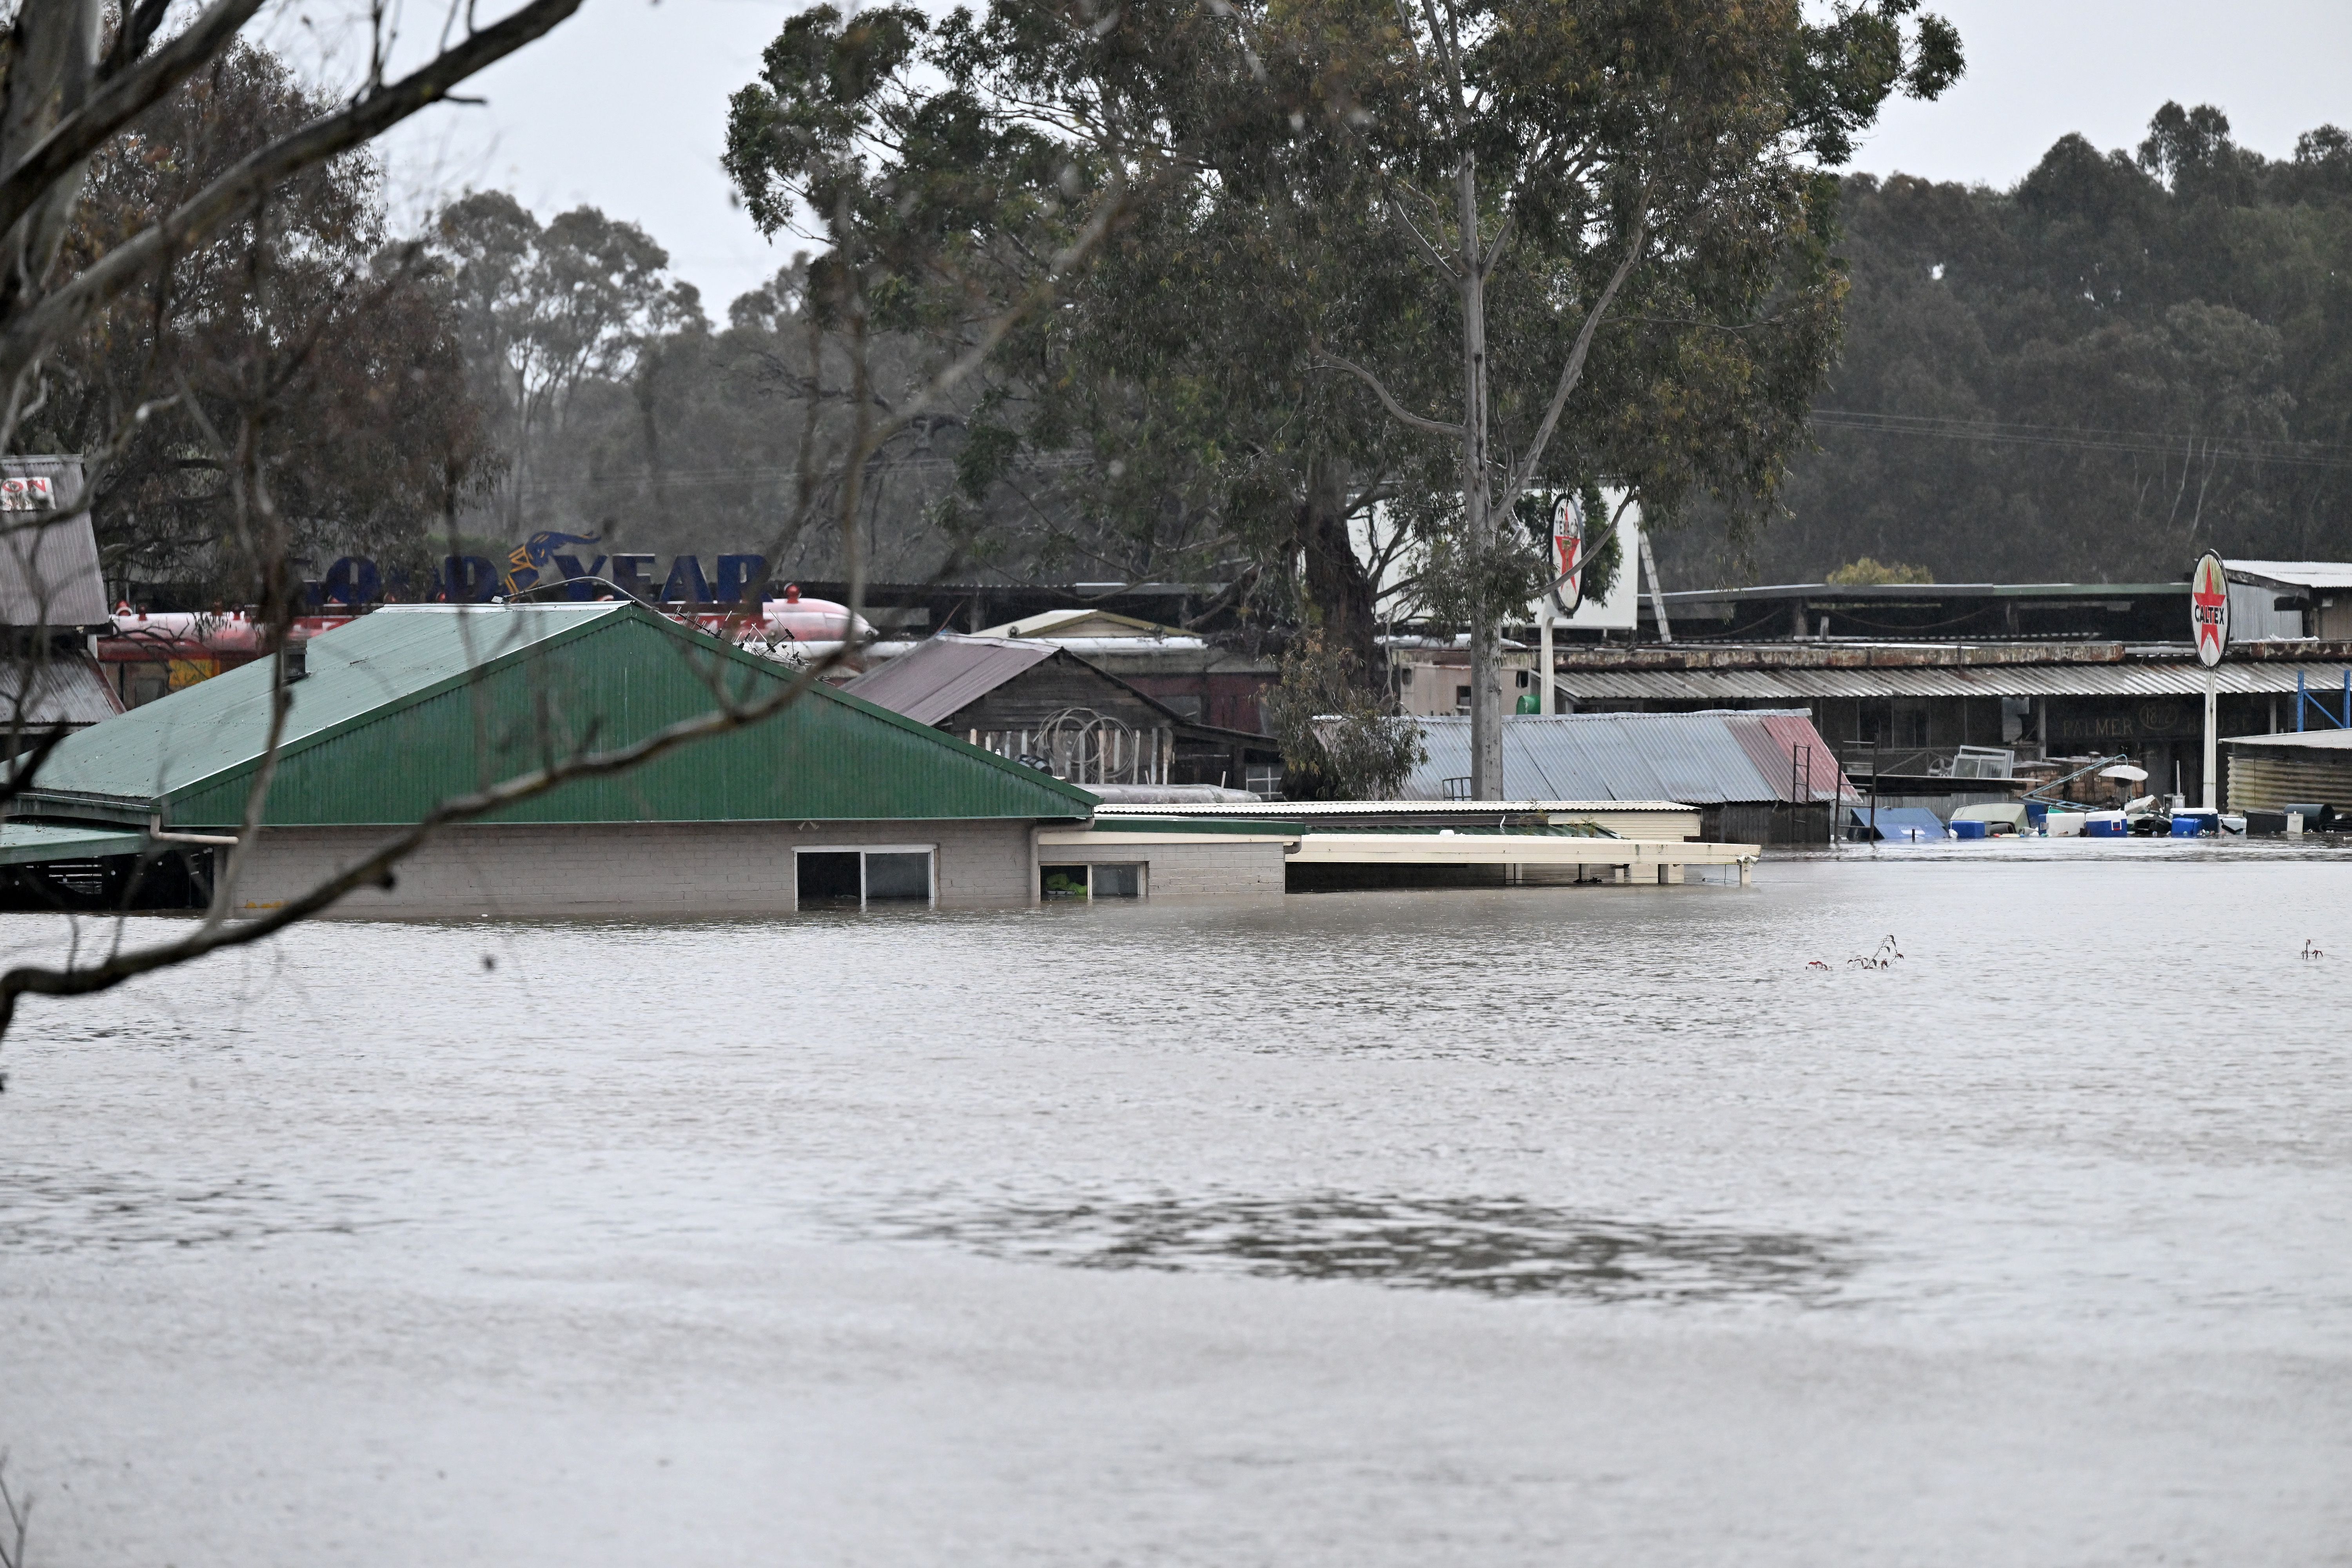 A general view shows a flooded area in a Sydney suburb.